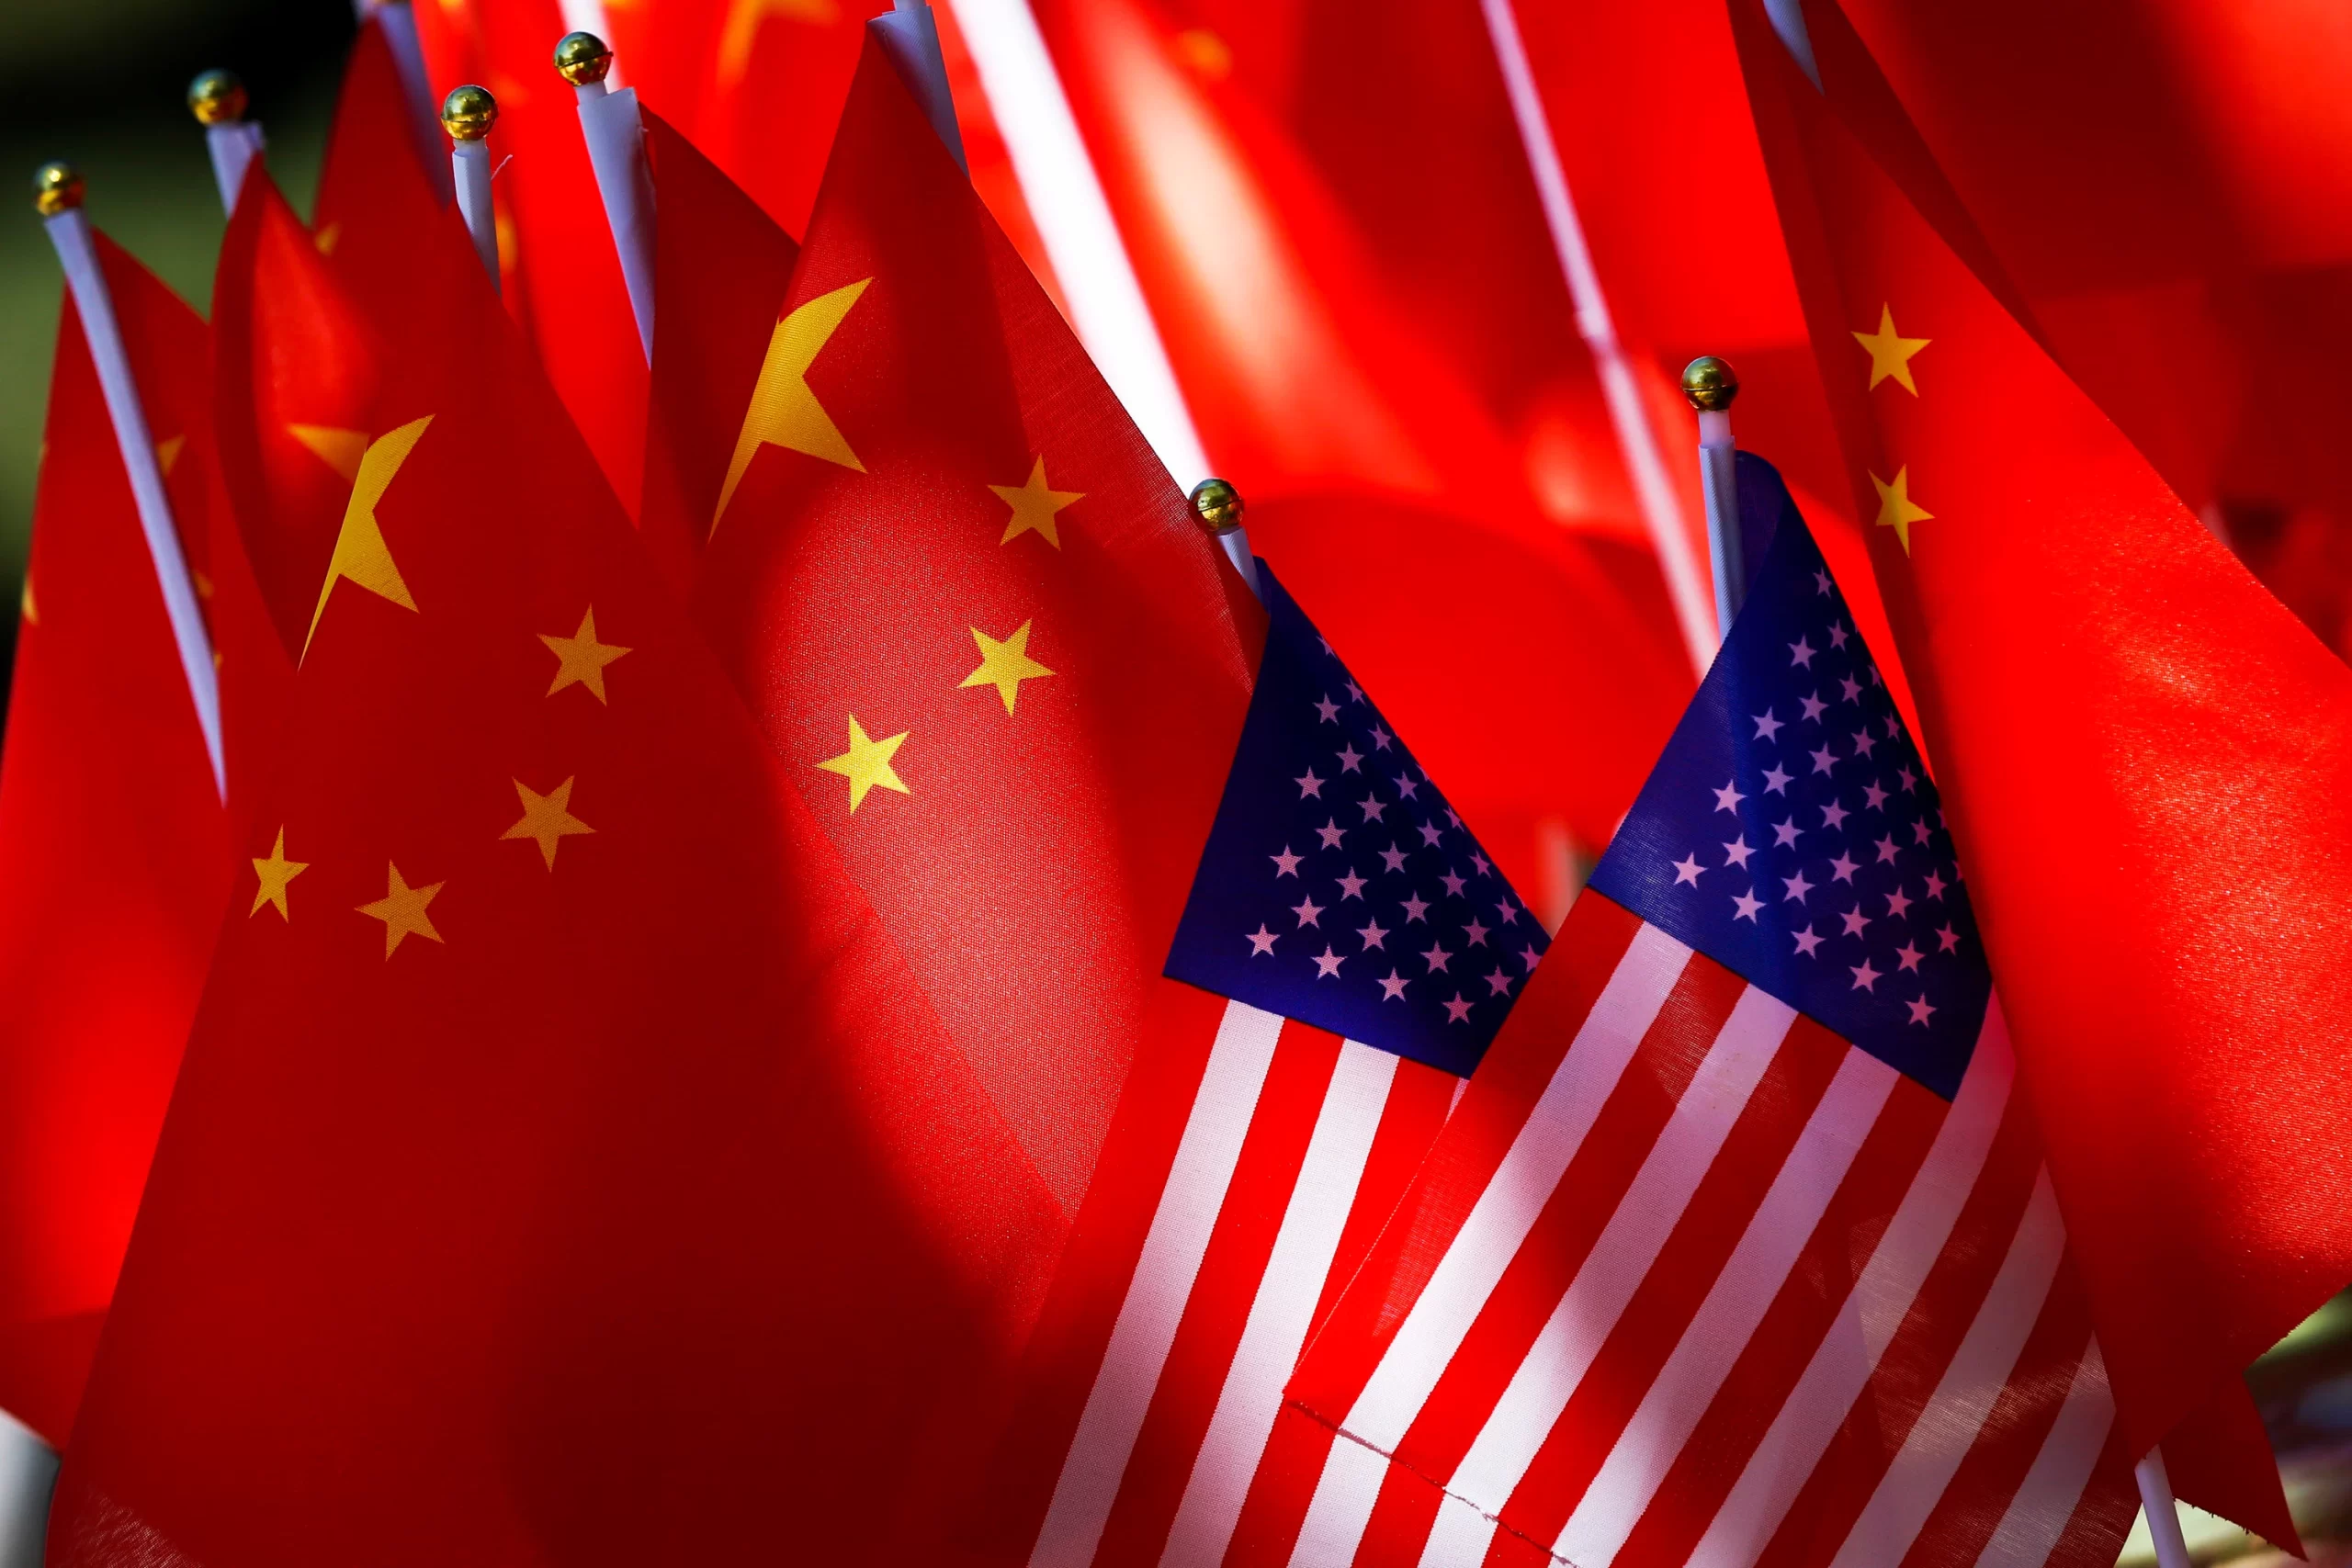 US and china flags